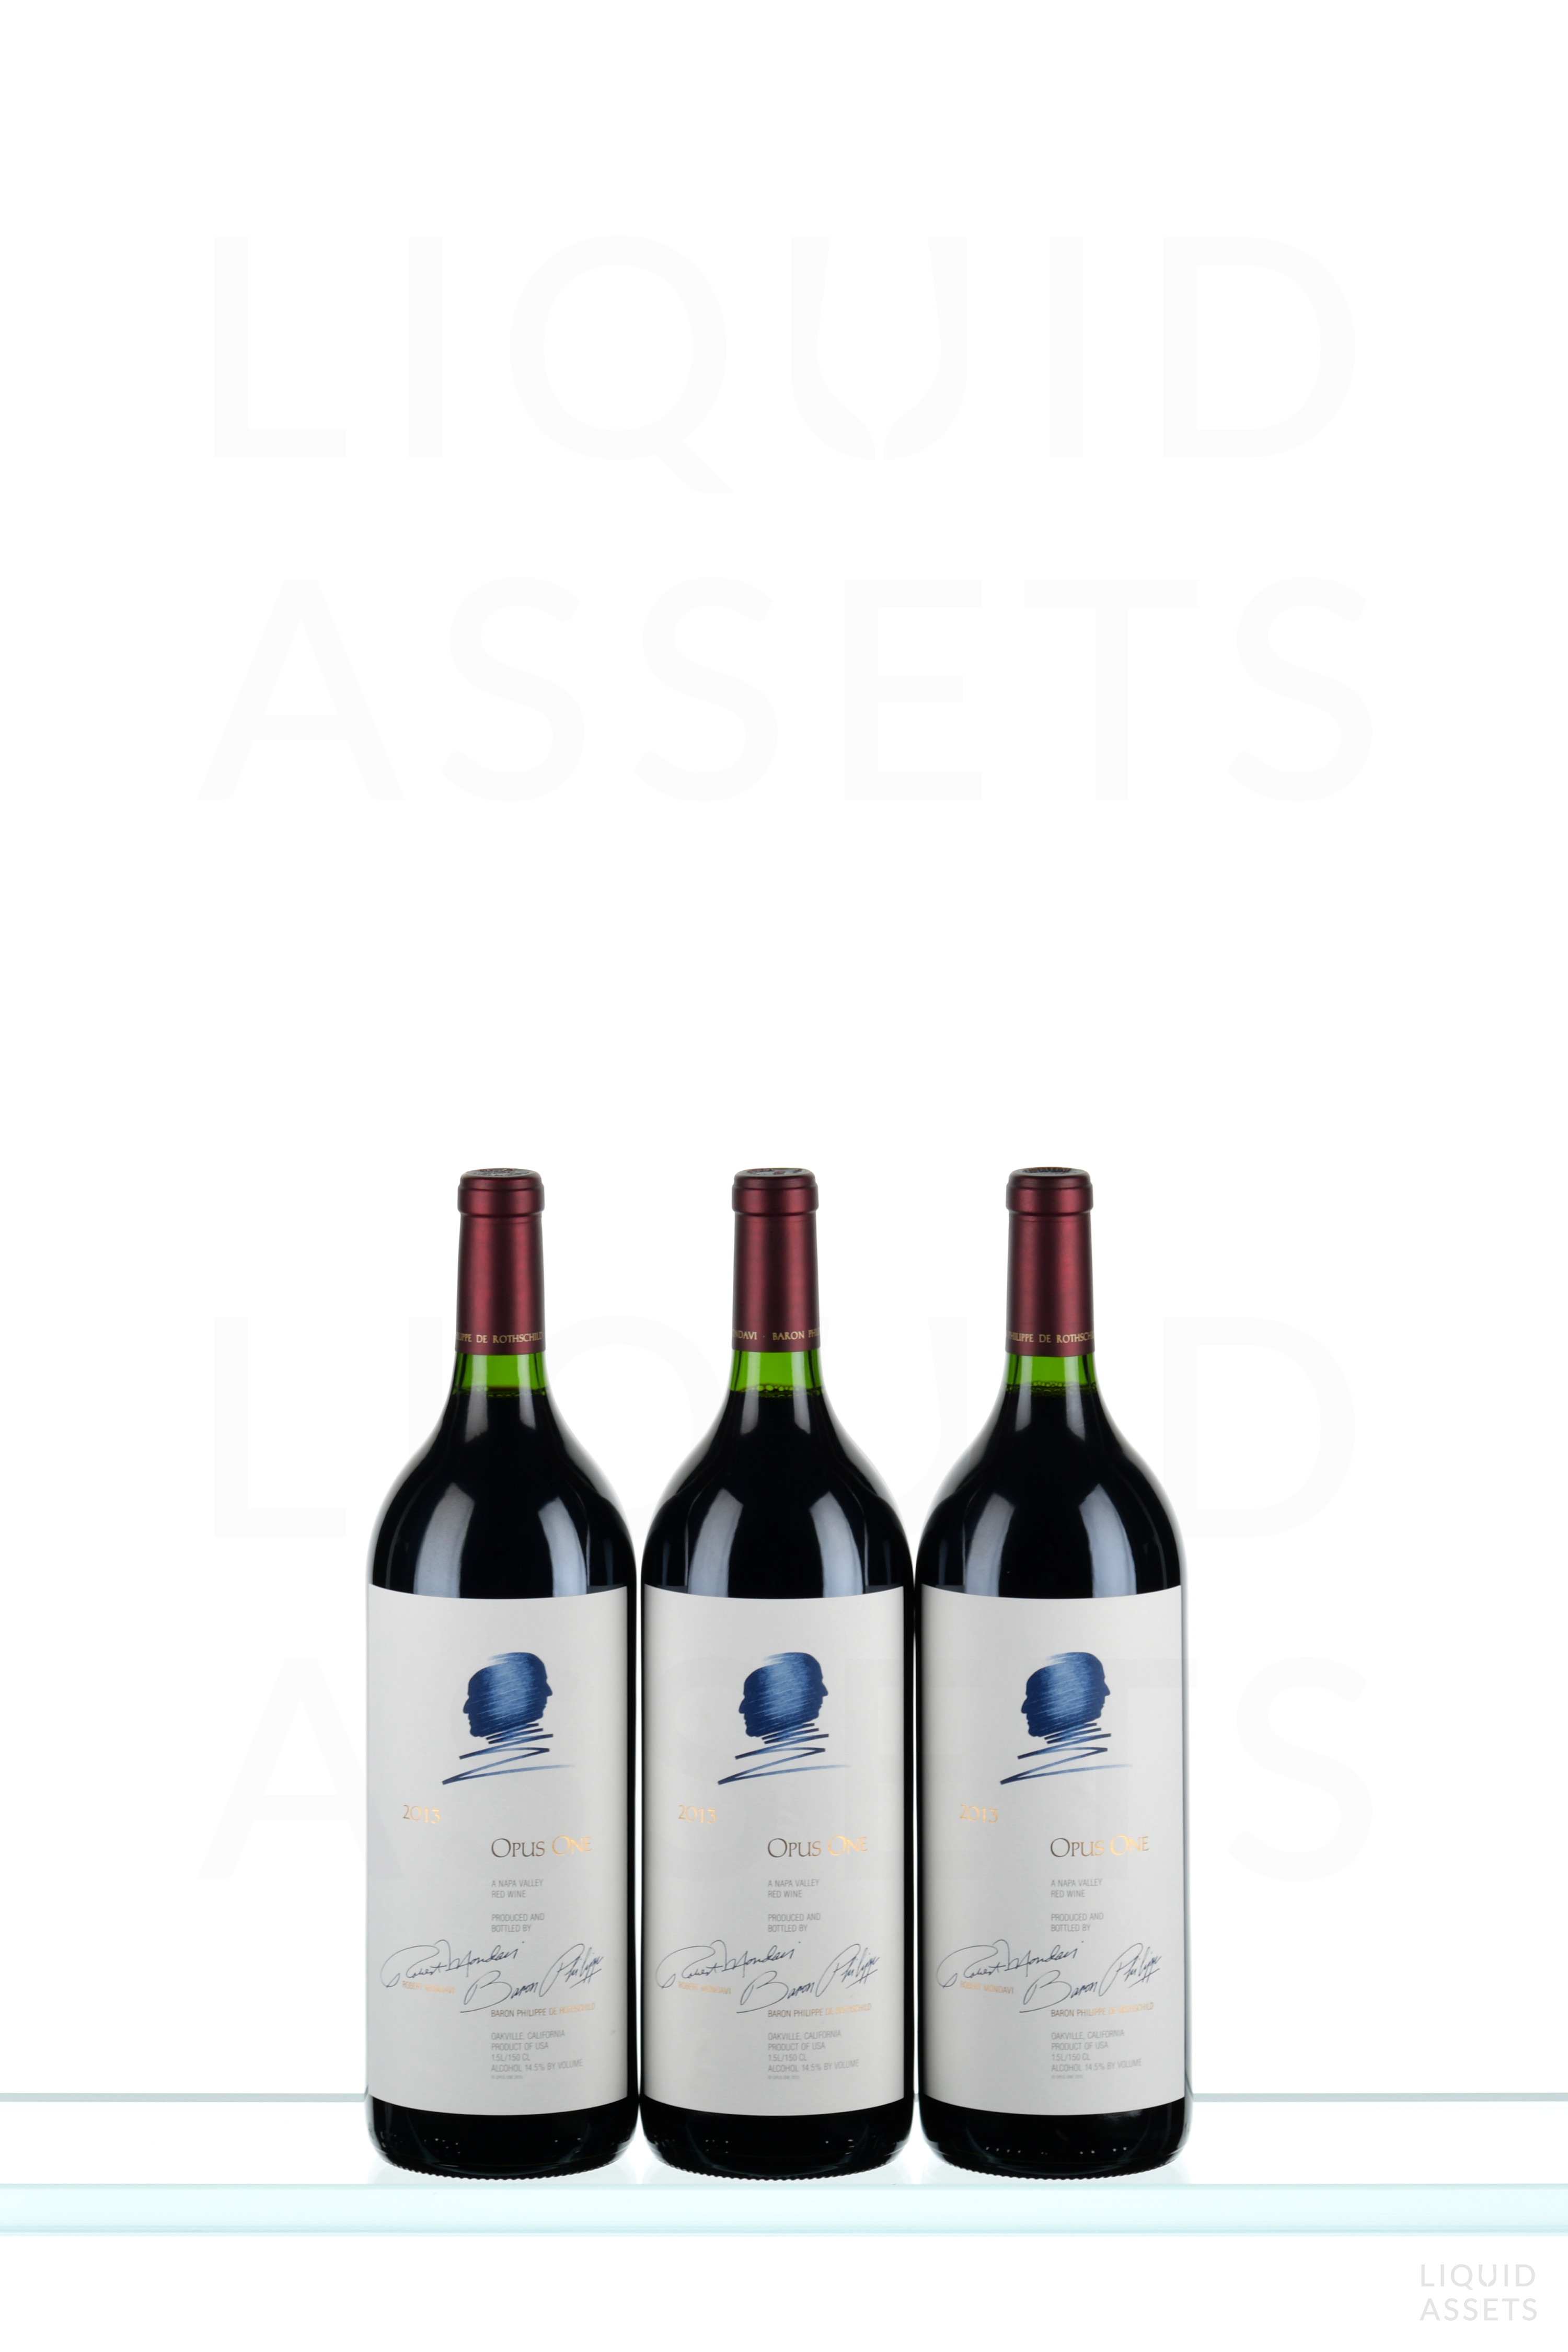 opus one 2013 stores